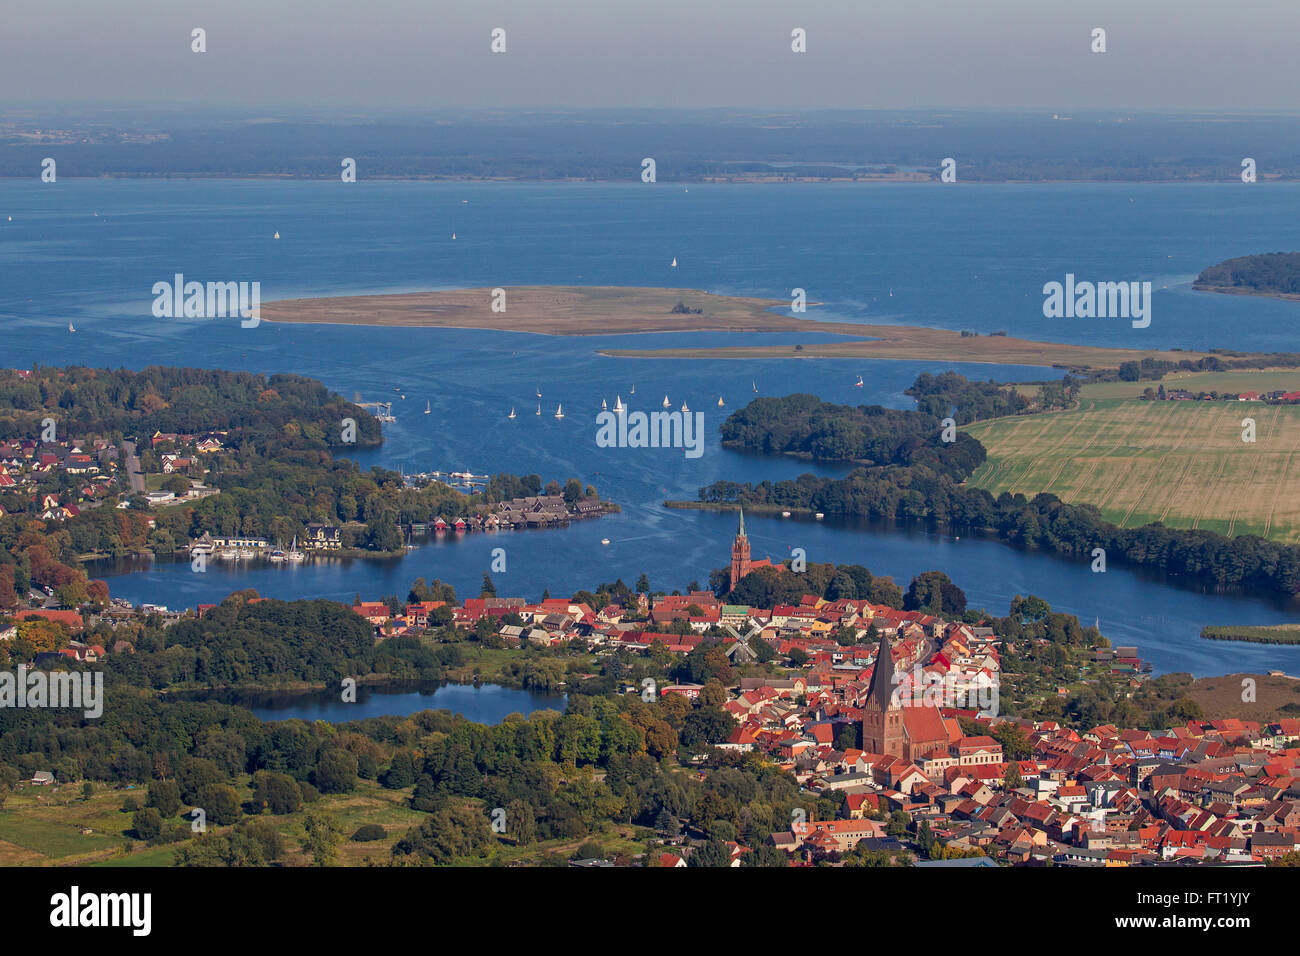 Aerial view over the city Röbel / Roebel on the western shore of Lake Müritz, Mecklenburg-Western Pomerania, Germany Stock Photo